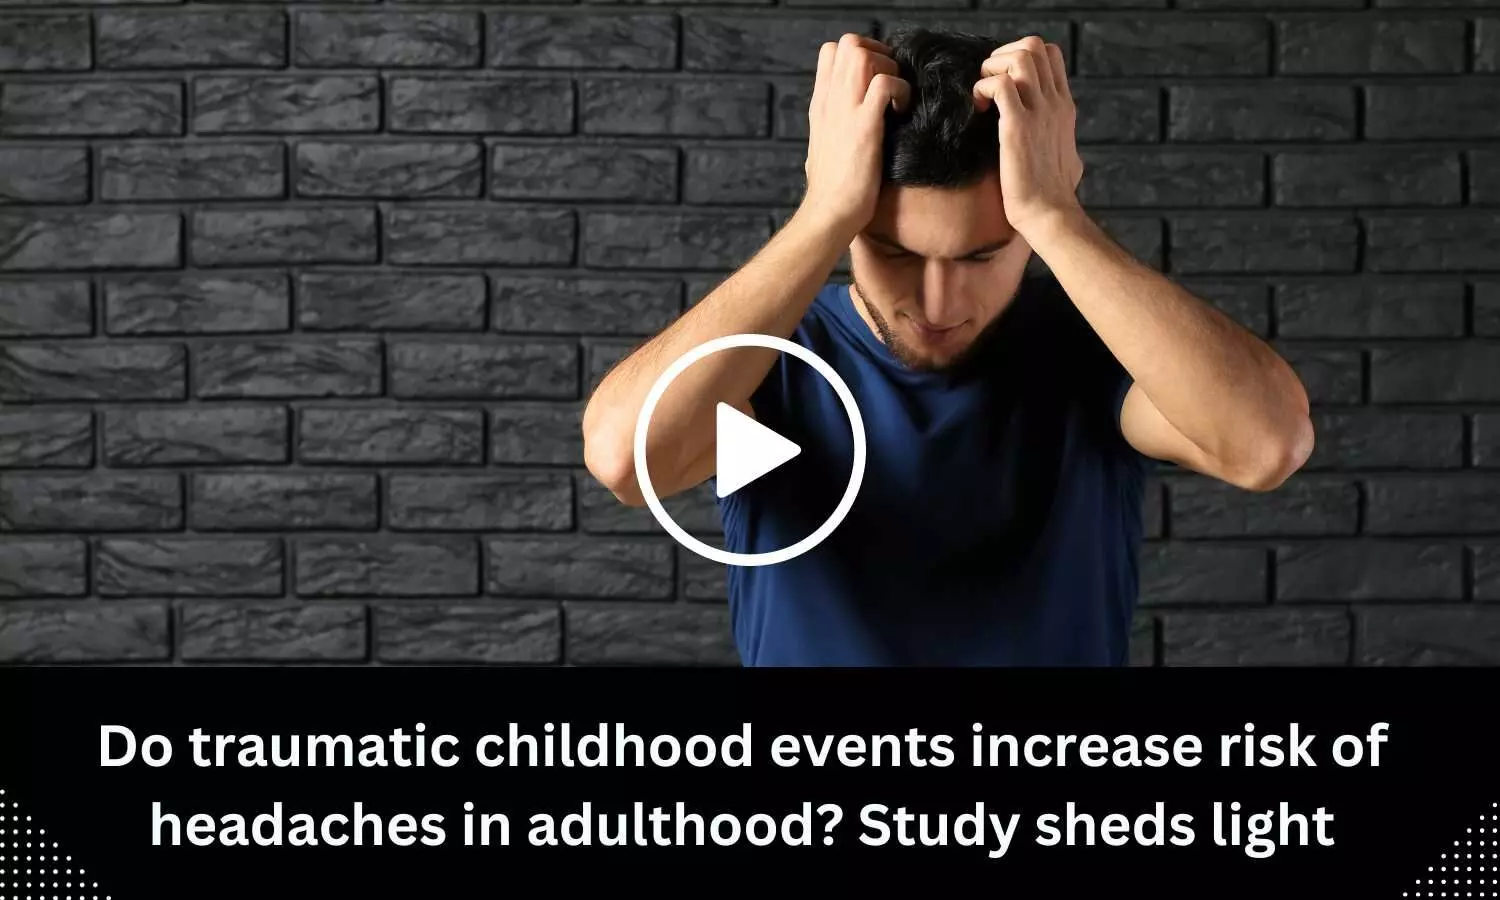 Do traumatic childhood events increase risk of headaches in adulthood? Study sheds light